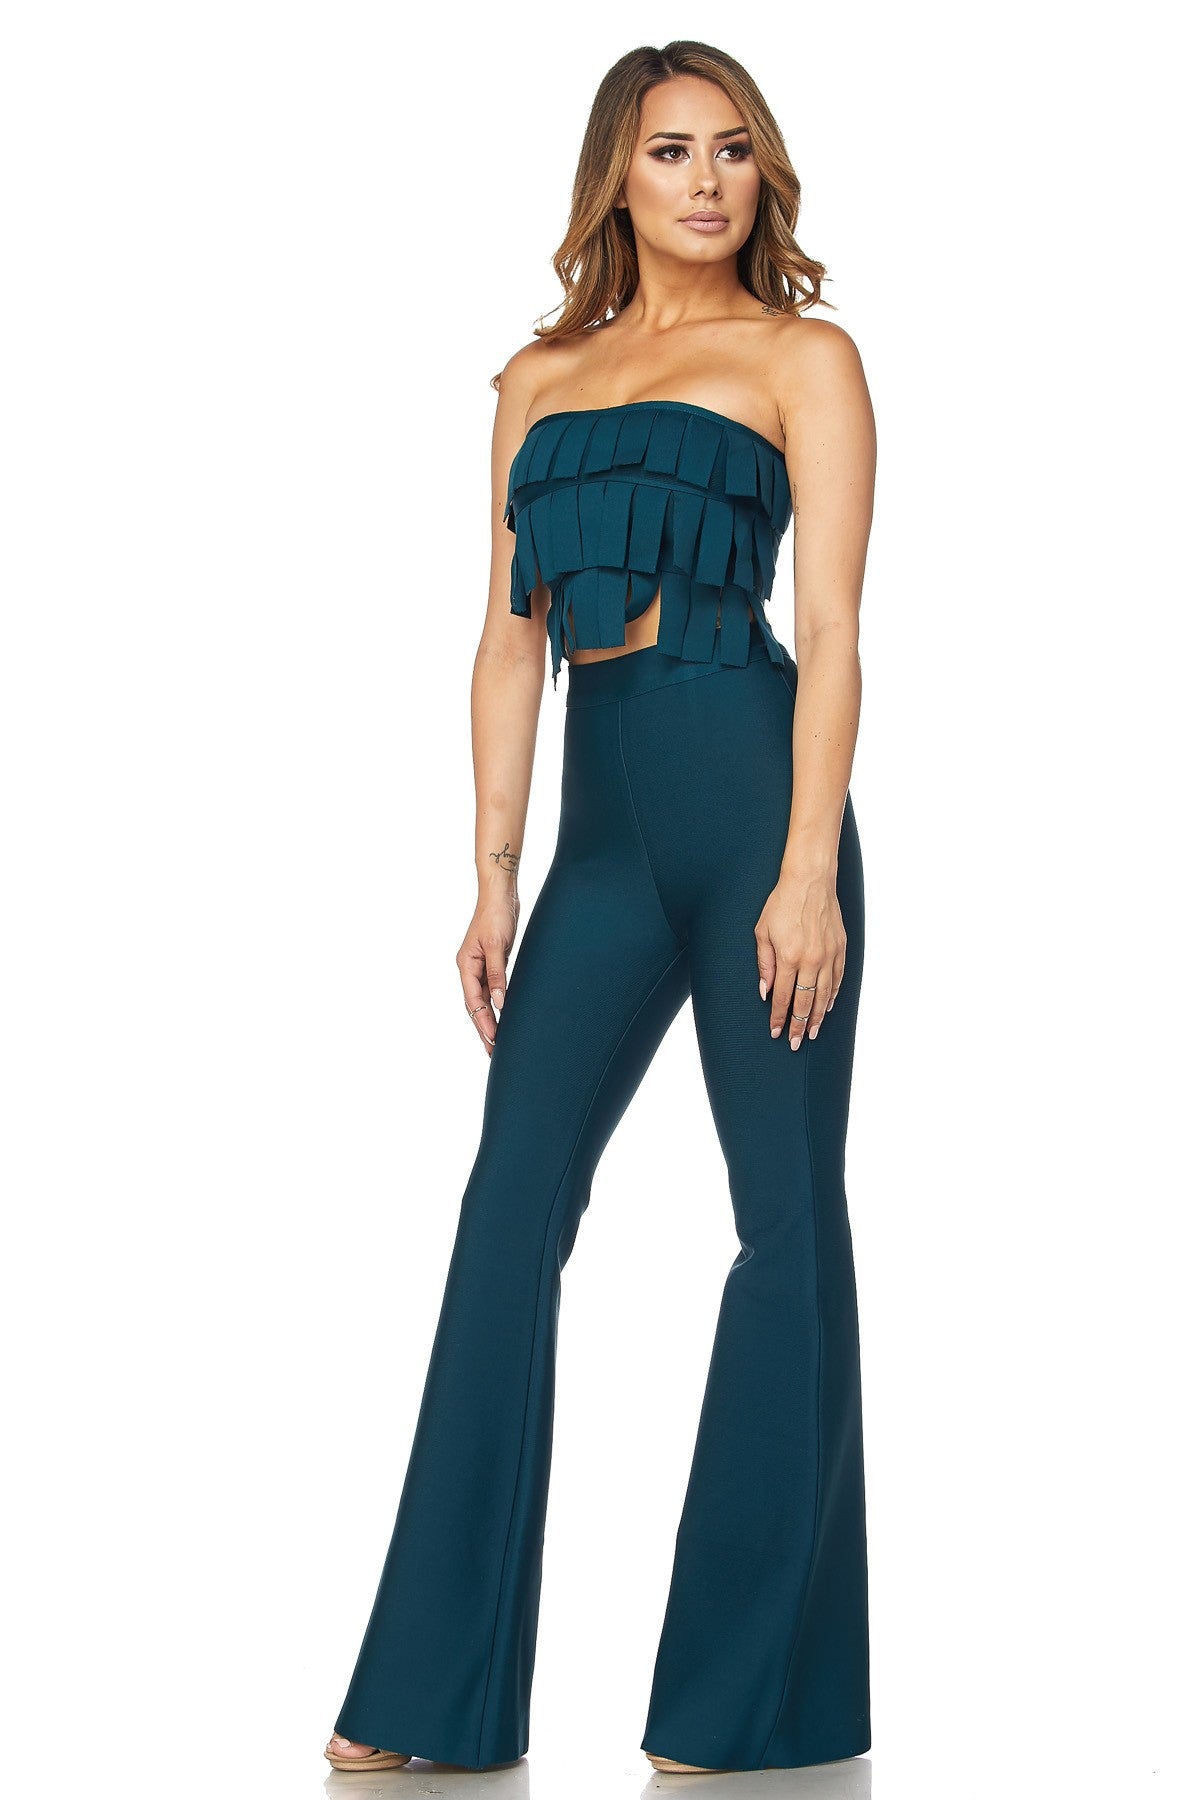 Black Two Piece Bandage Crop Top and Pant Set - steven wick